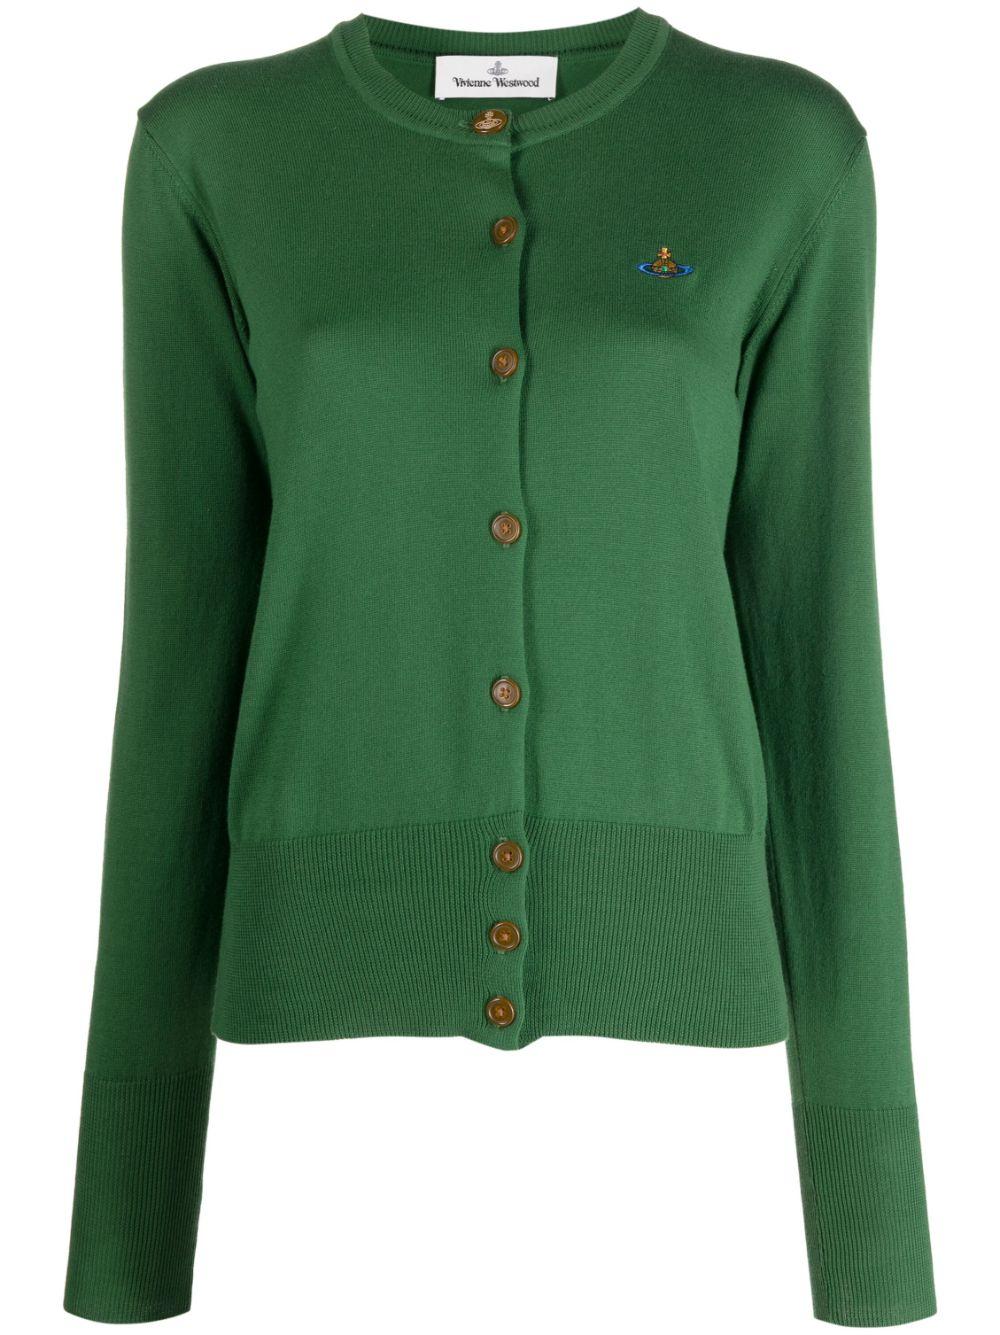 Vivienne Westwood Bea Orb-embroidery Cotton Cardigan in Green | Lyst